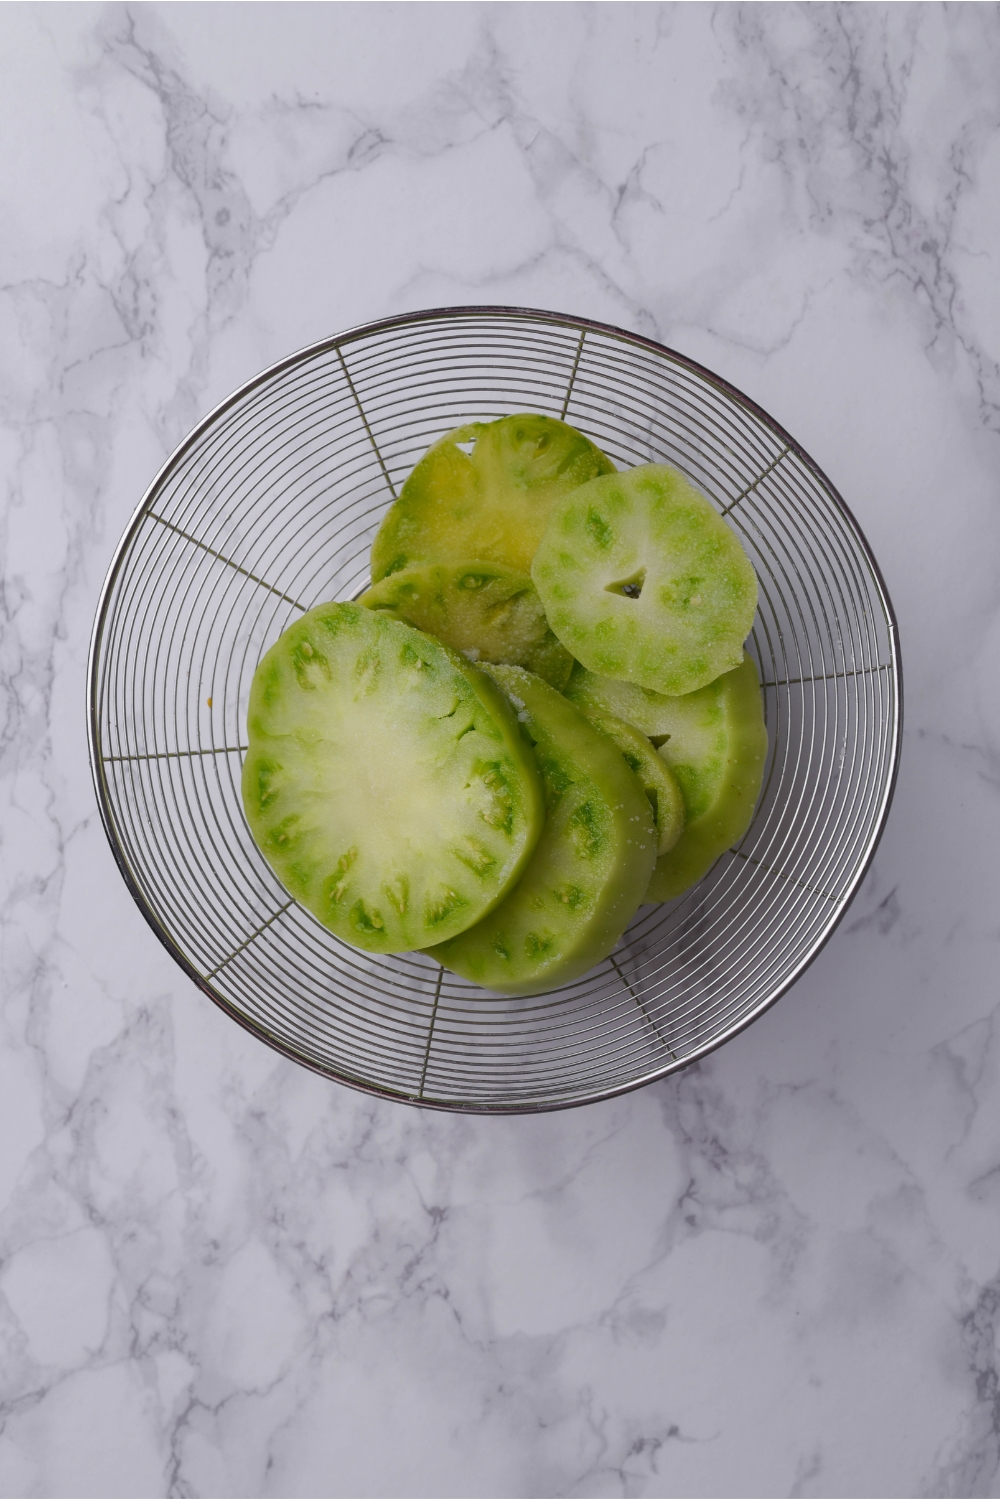 Slices of green tomatoes in a colander.